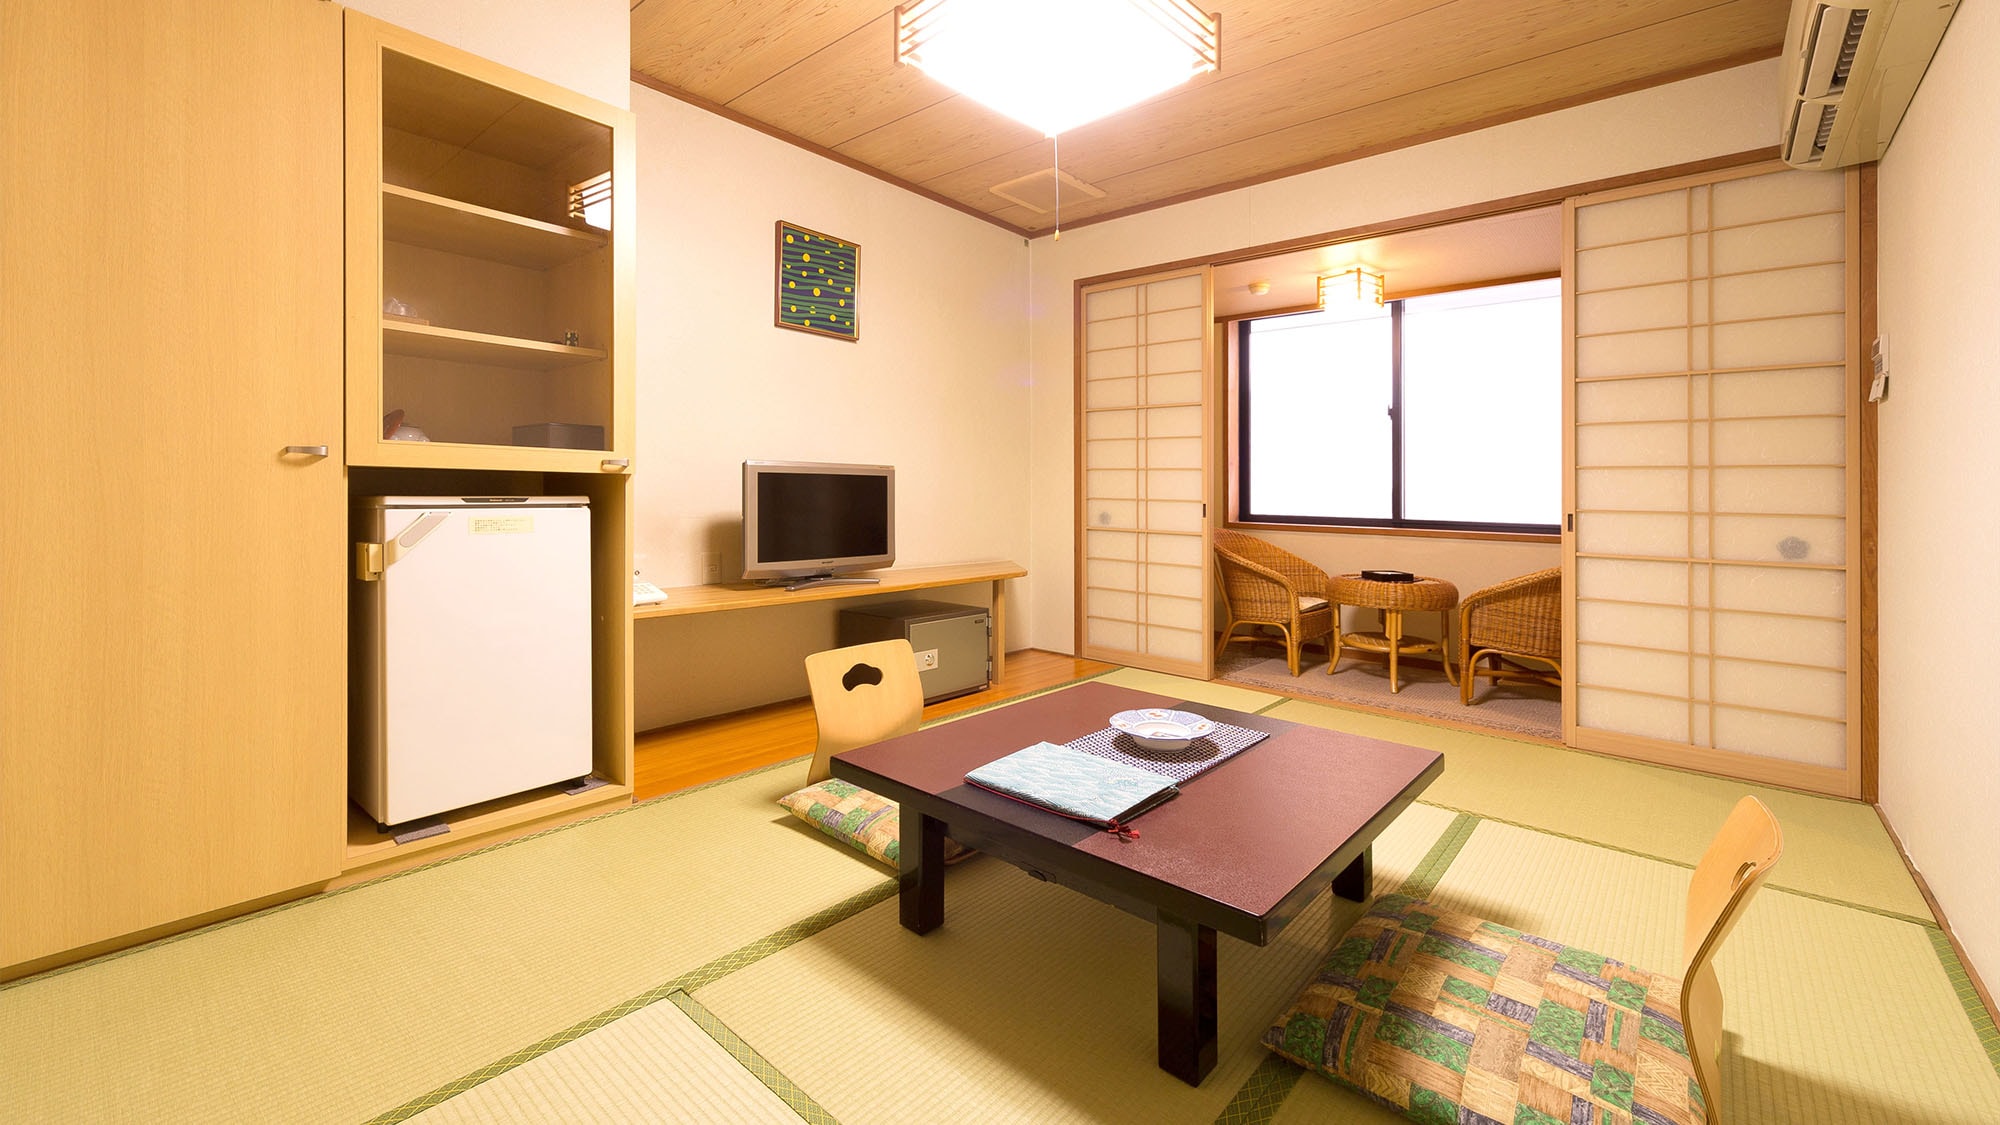 ・ It is a room where you can relax on tatami mats.